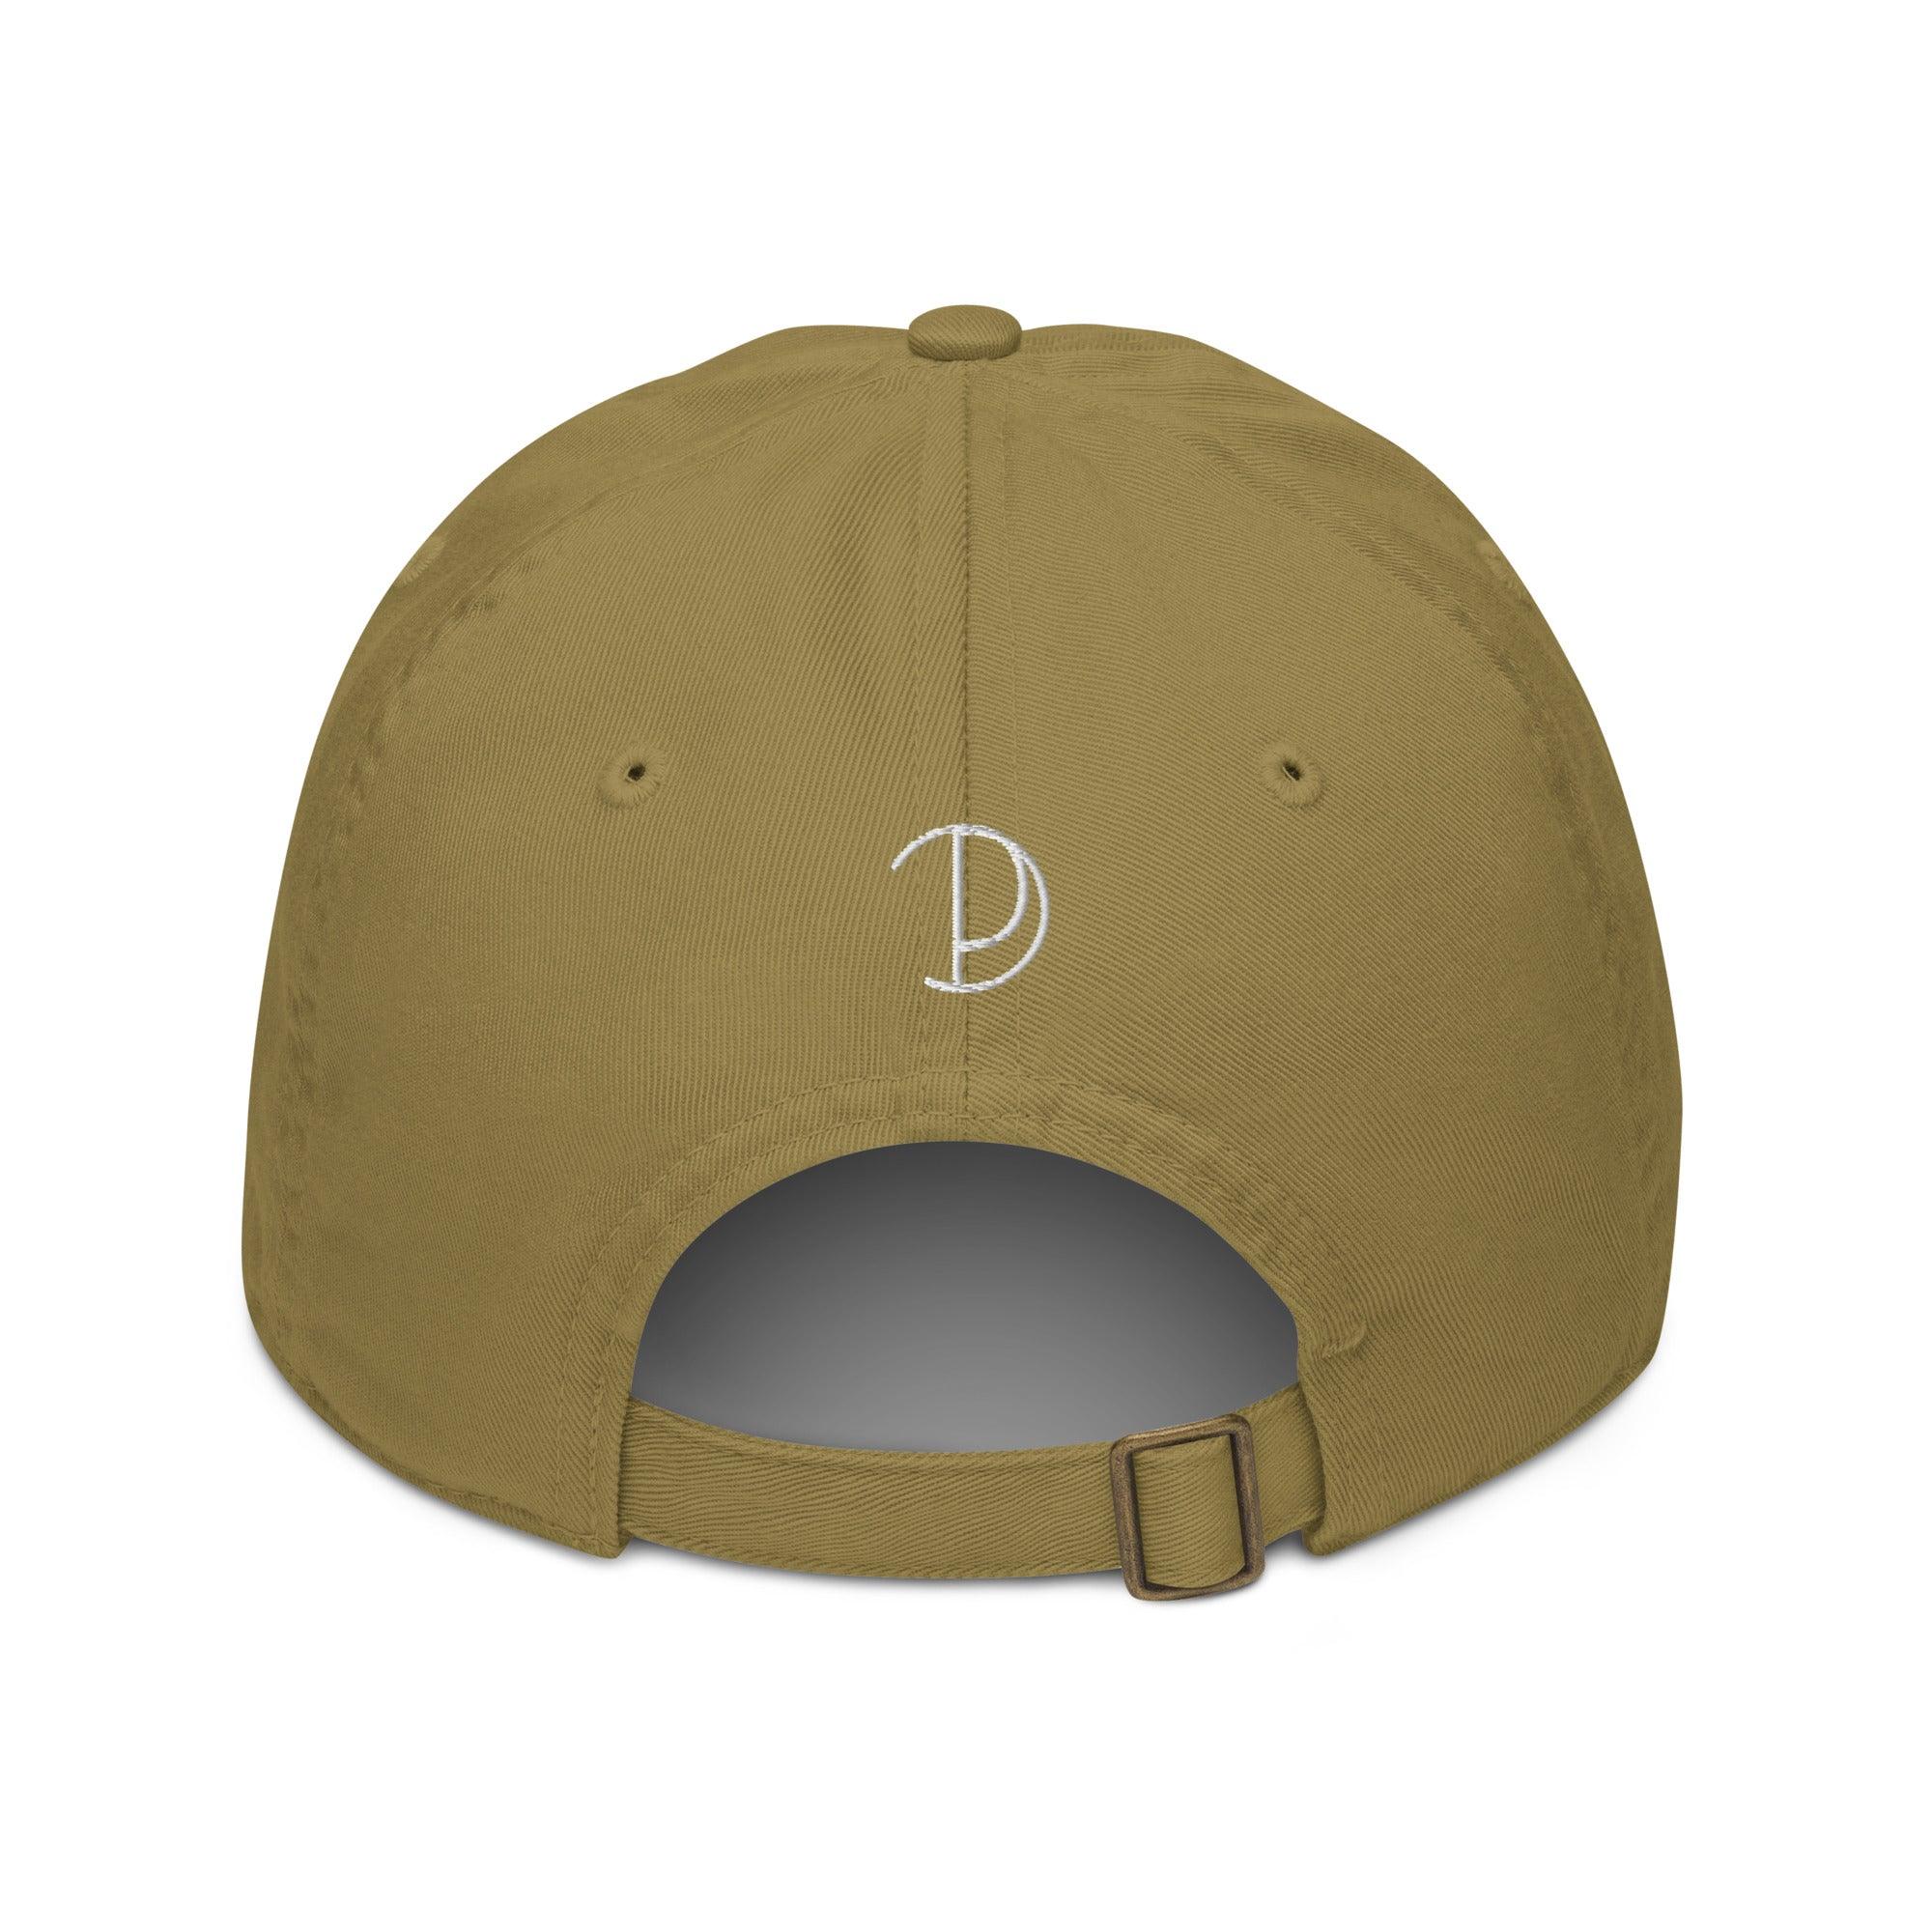 Embroidered P Baseball Cap product